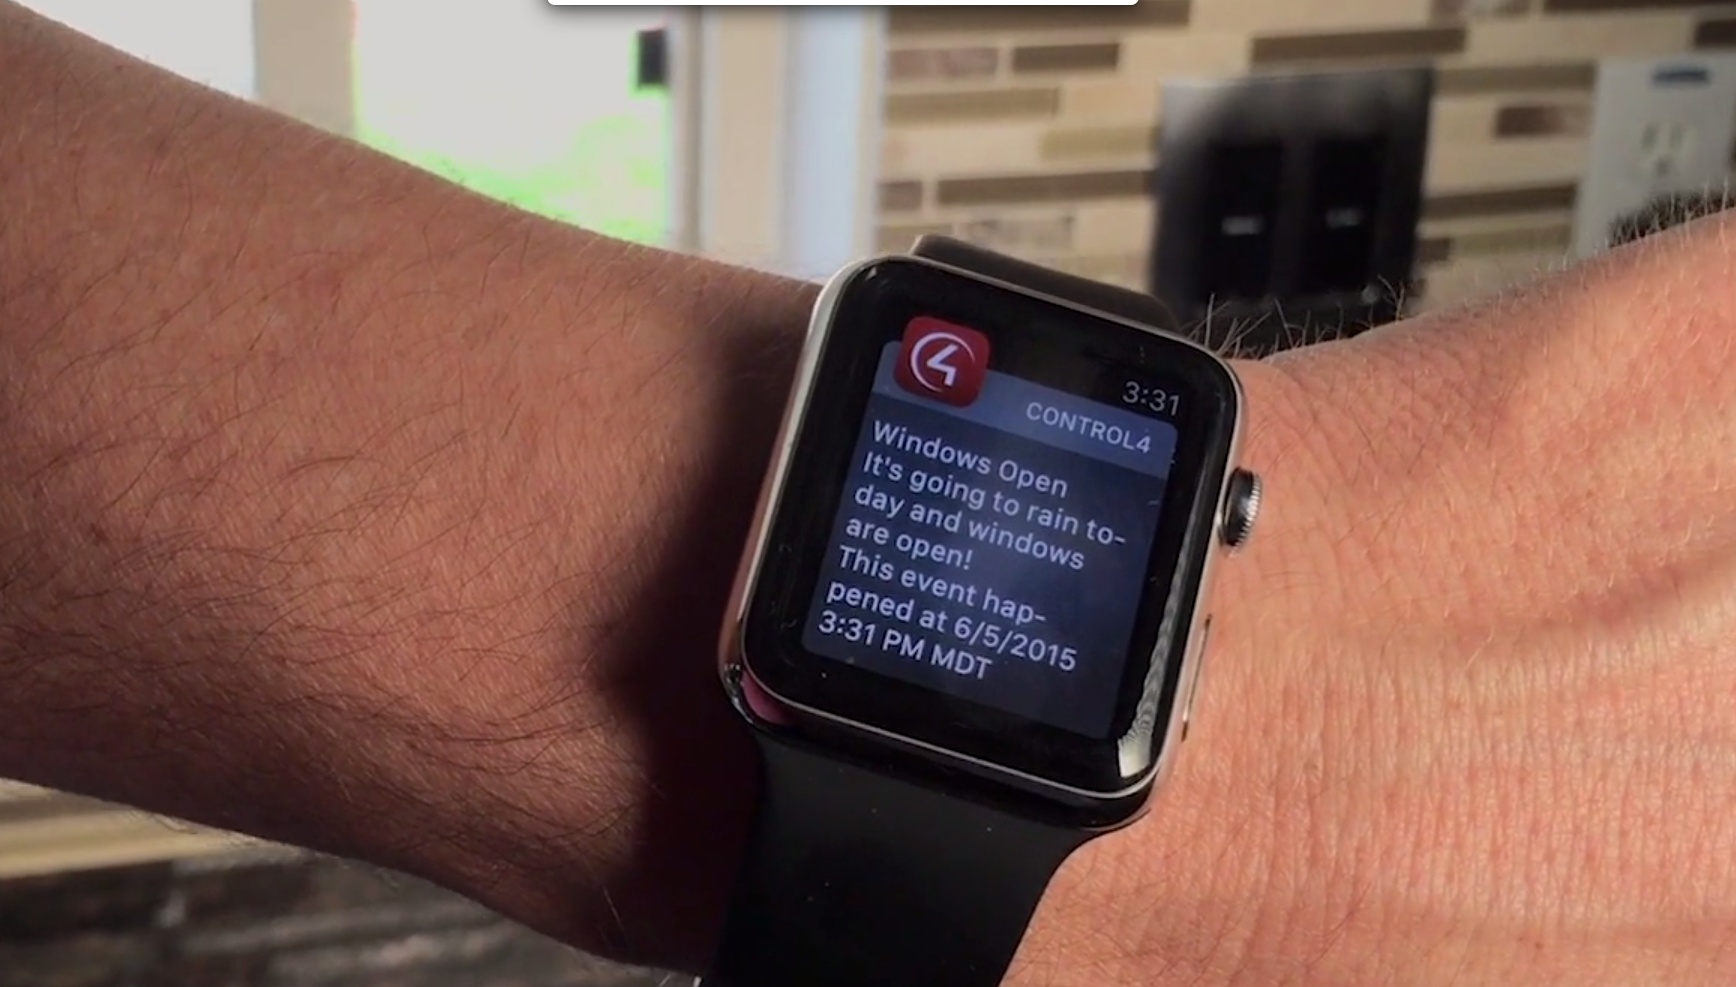 Alerts from your Smart Home on your watch and mobile! [VIDEO]: alerts, push notifications, safety, security, smart home, 